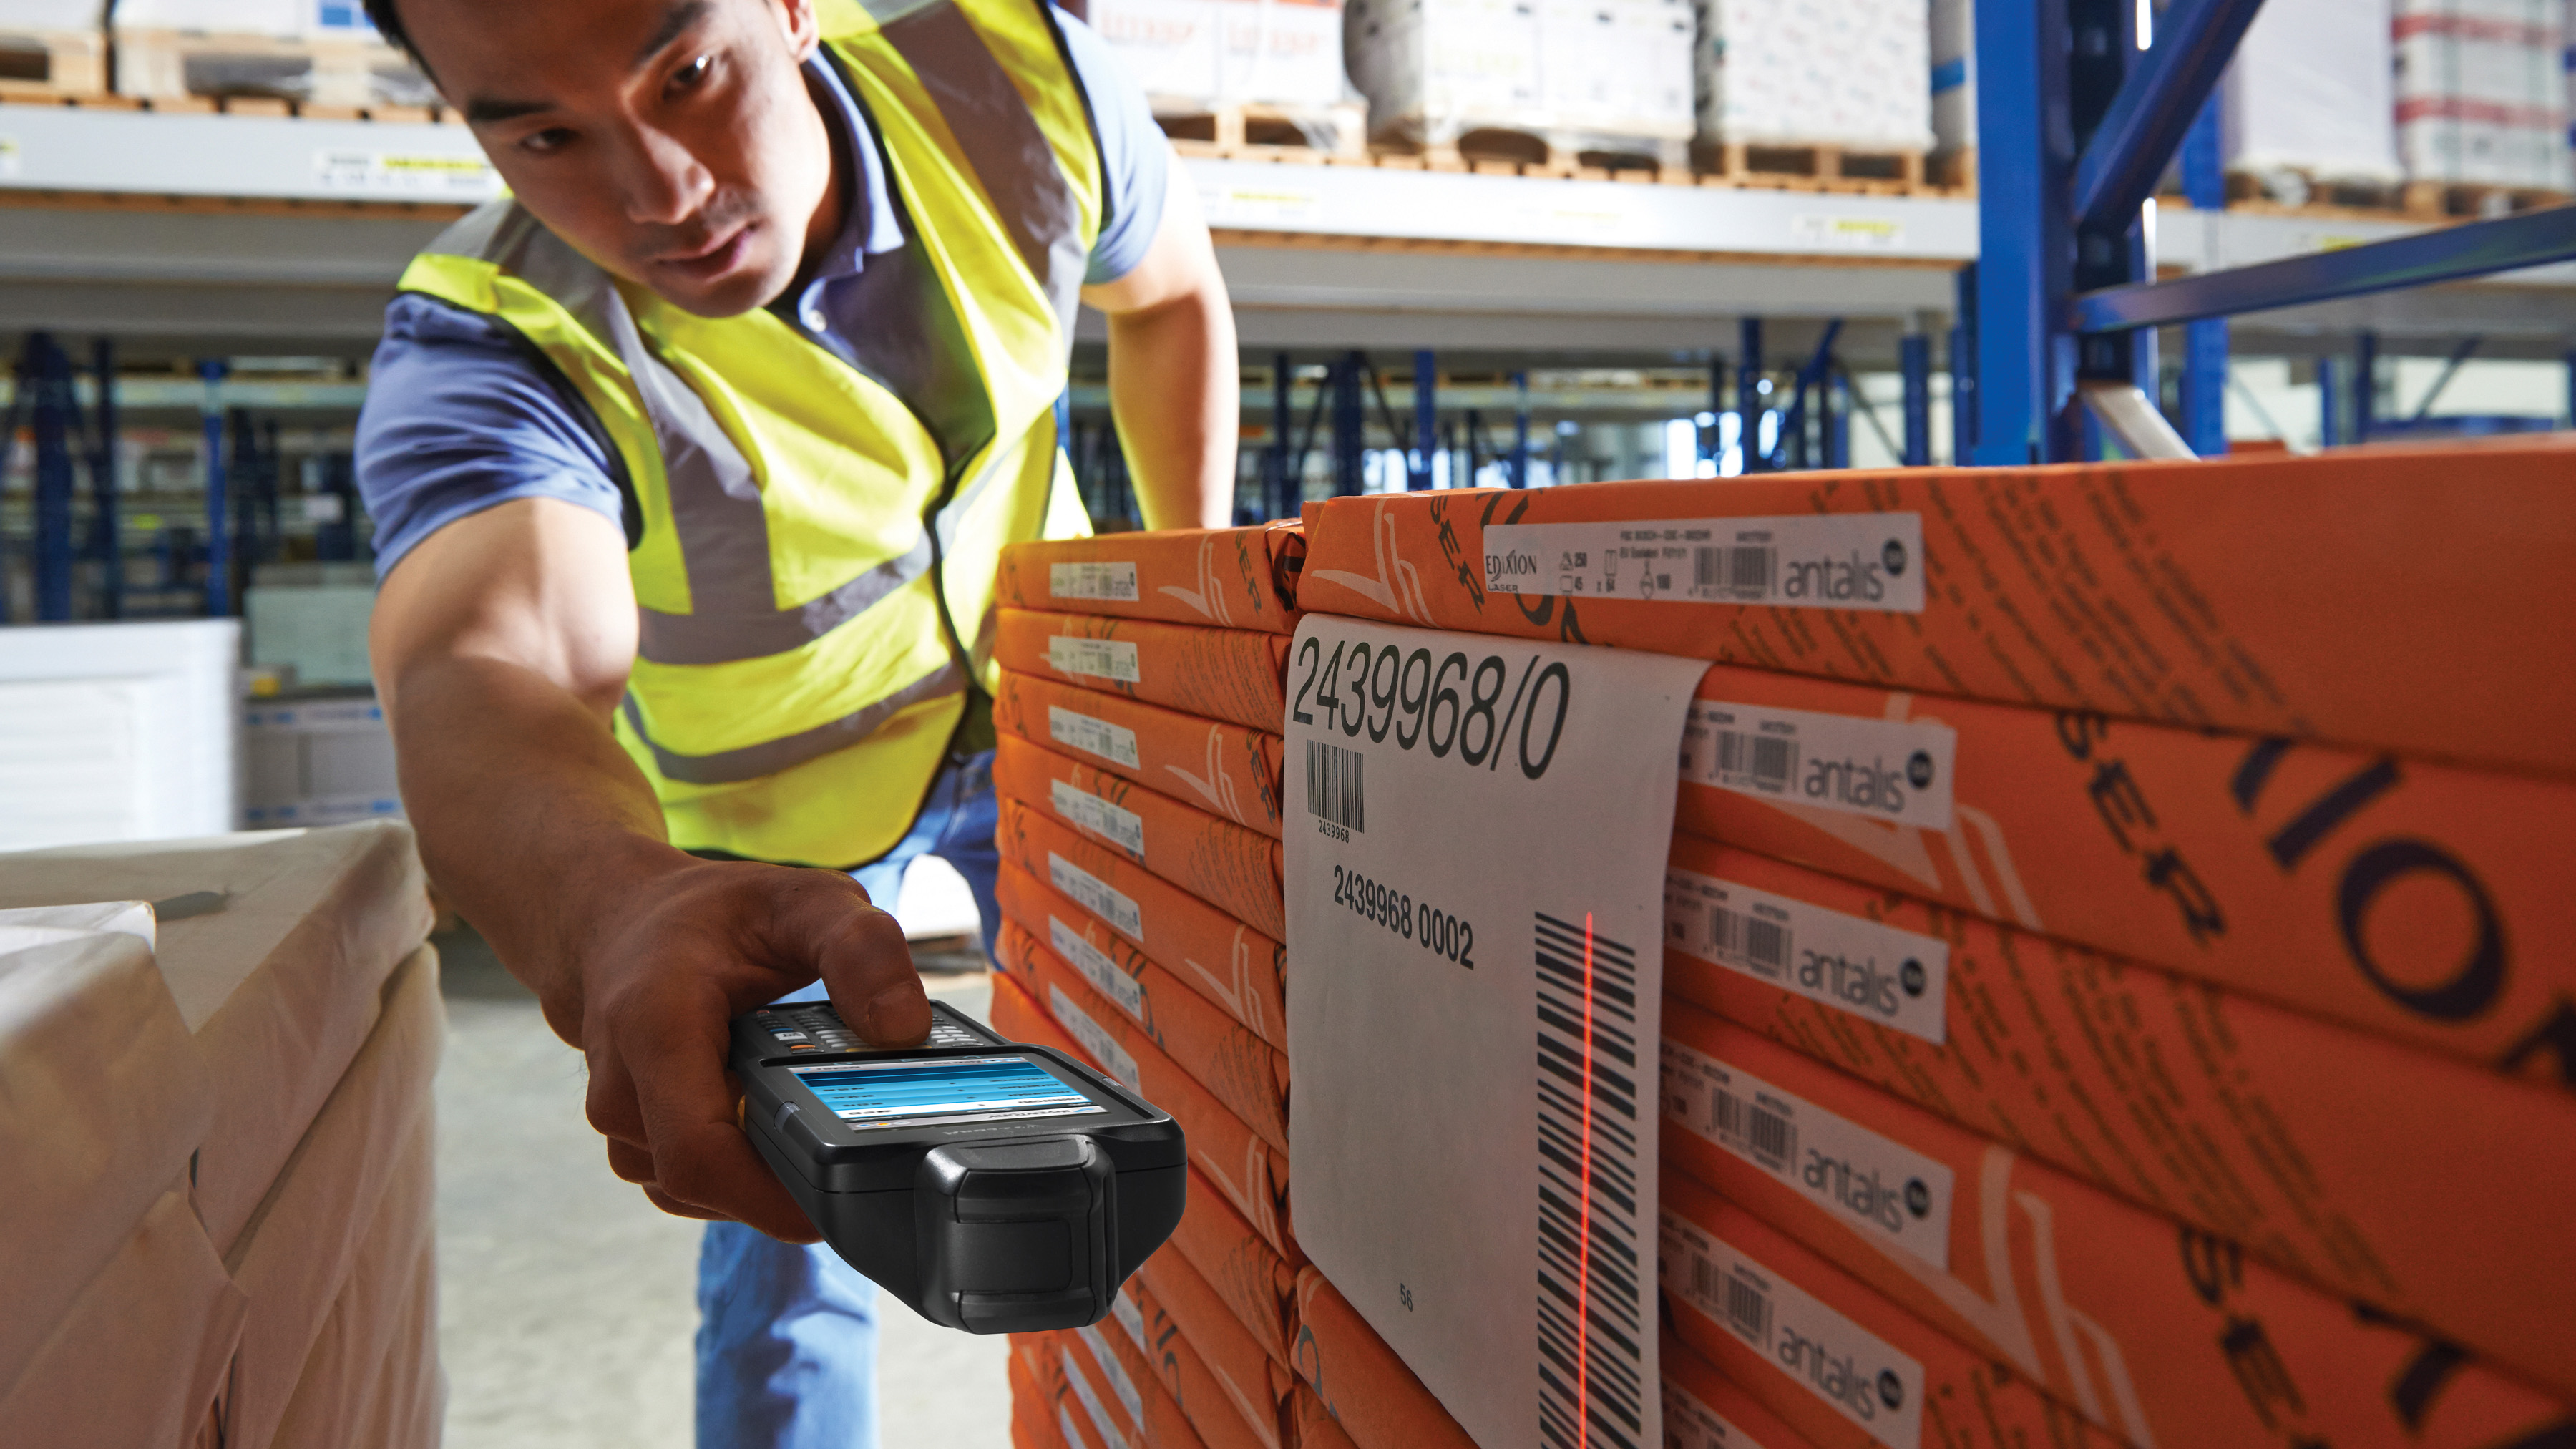 A warehouse worker scans a barcode from a hard to reach place.